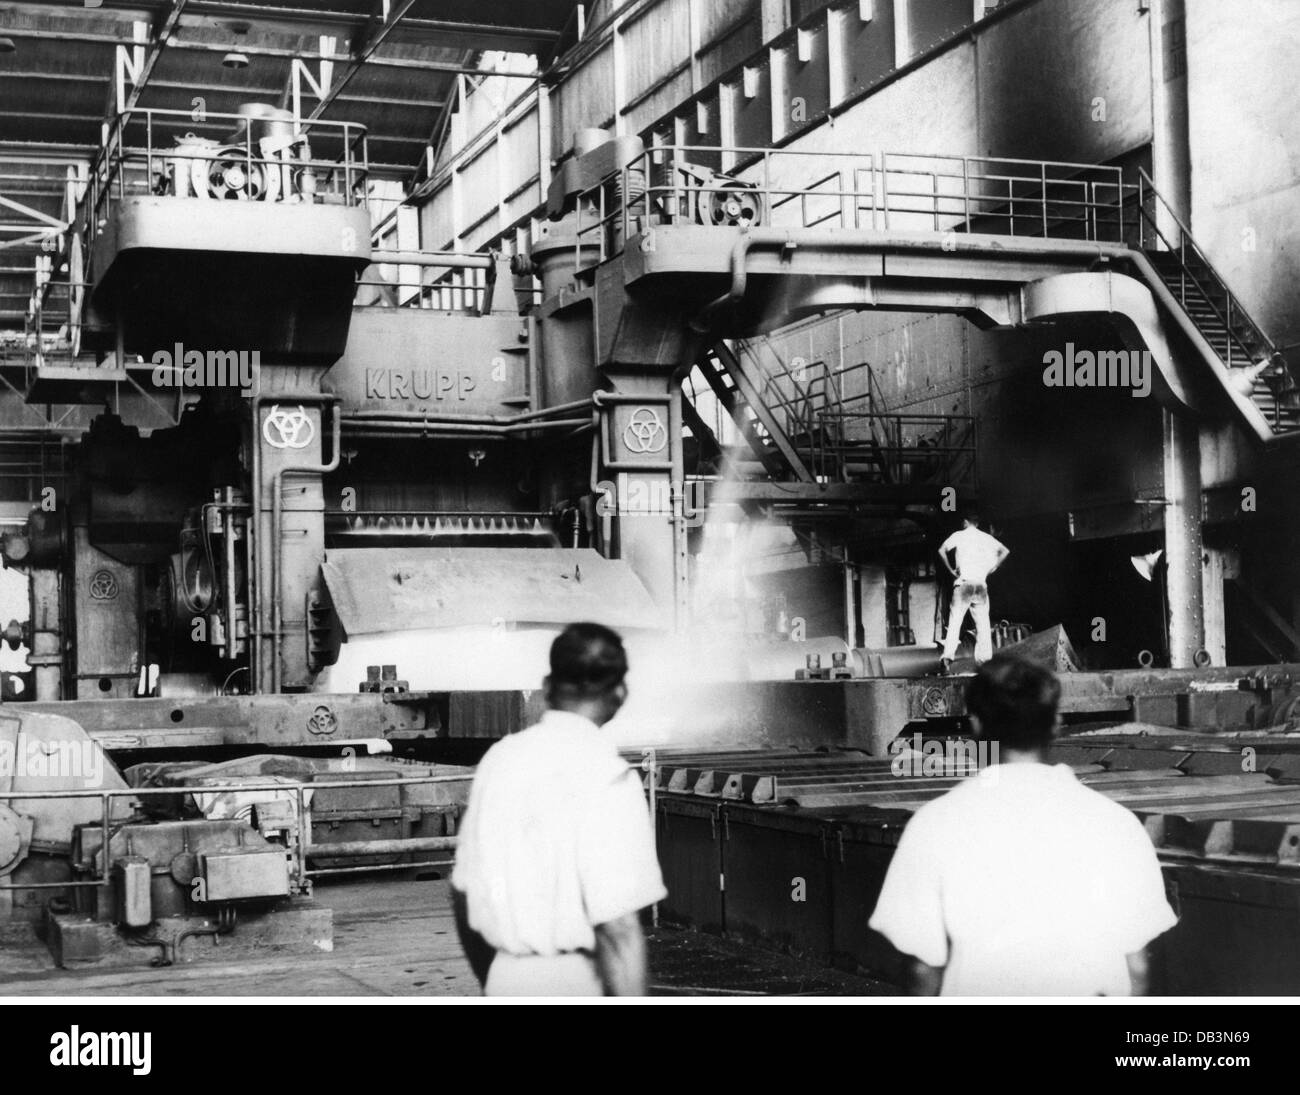 industry, metal industry, steel, steel mill in Rourkela, Orissa, India, interior view, Quarto Heavy Plate Rolling Mill of Krupp, 1964, Additional-Rights-Clearences-Not Available Stock Photo